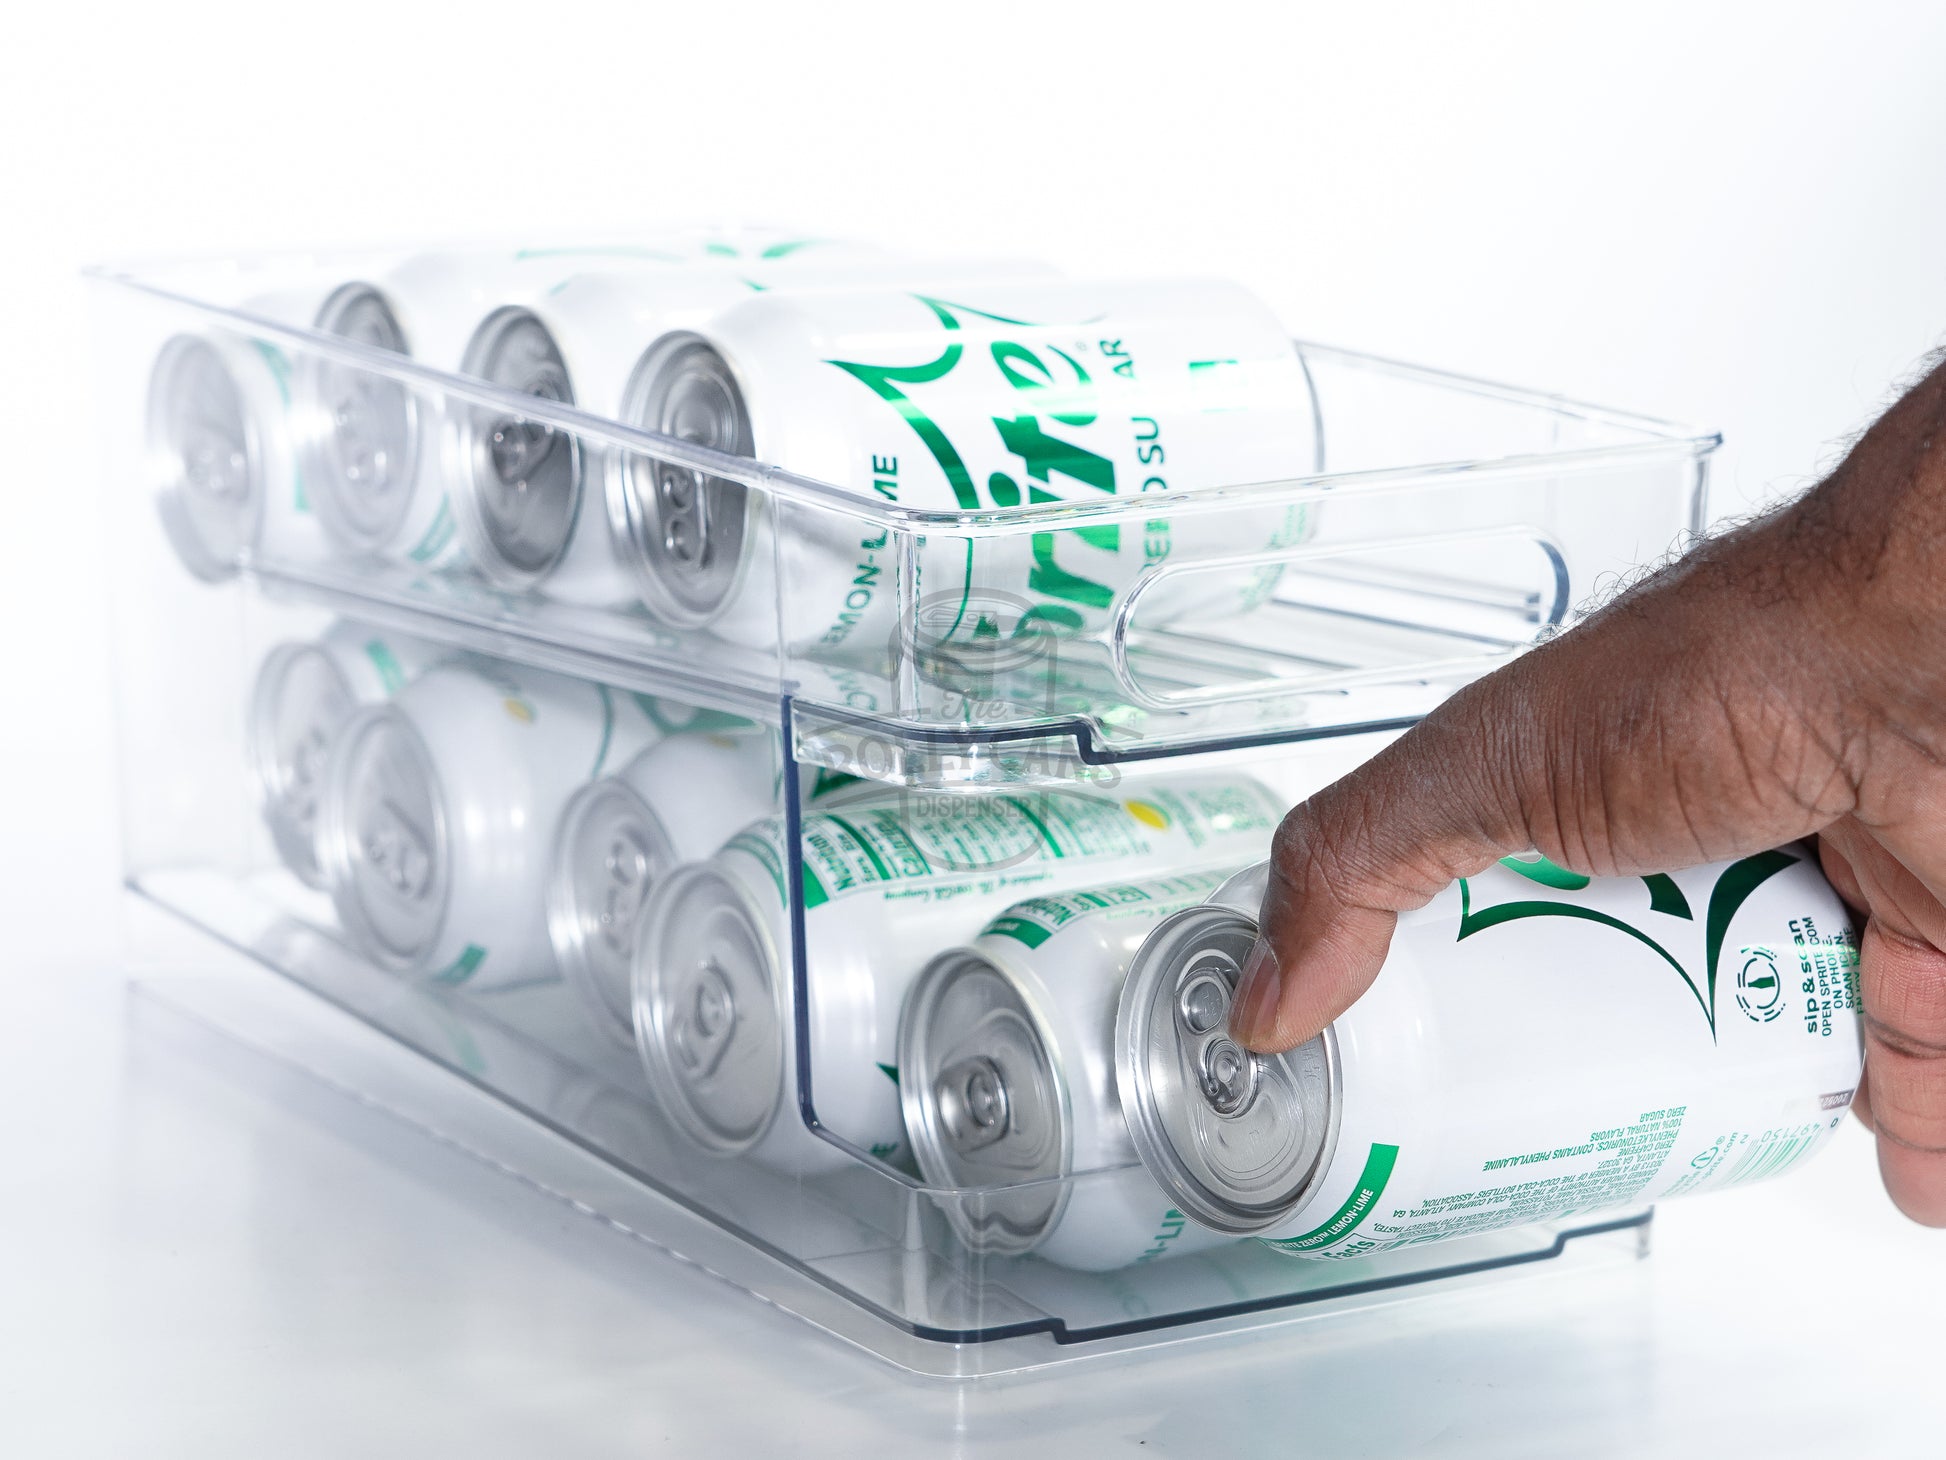 Compact Can Organizer for Seltzer, Soda, Beer - Ideal for Fridge, Cabi –  The Rolly Cans